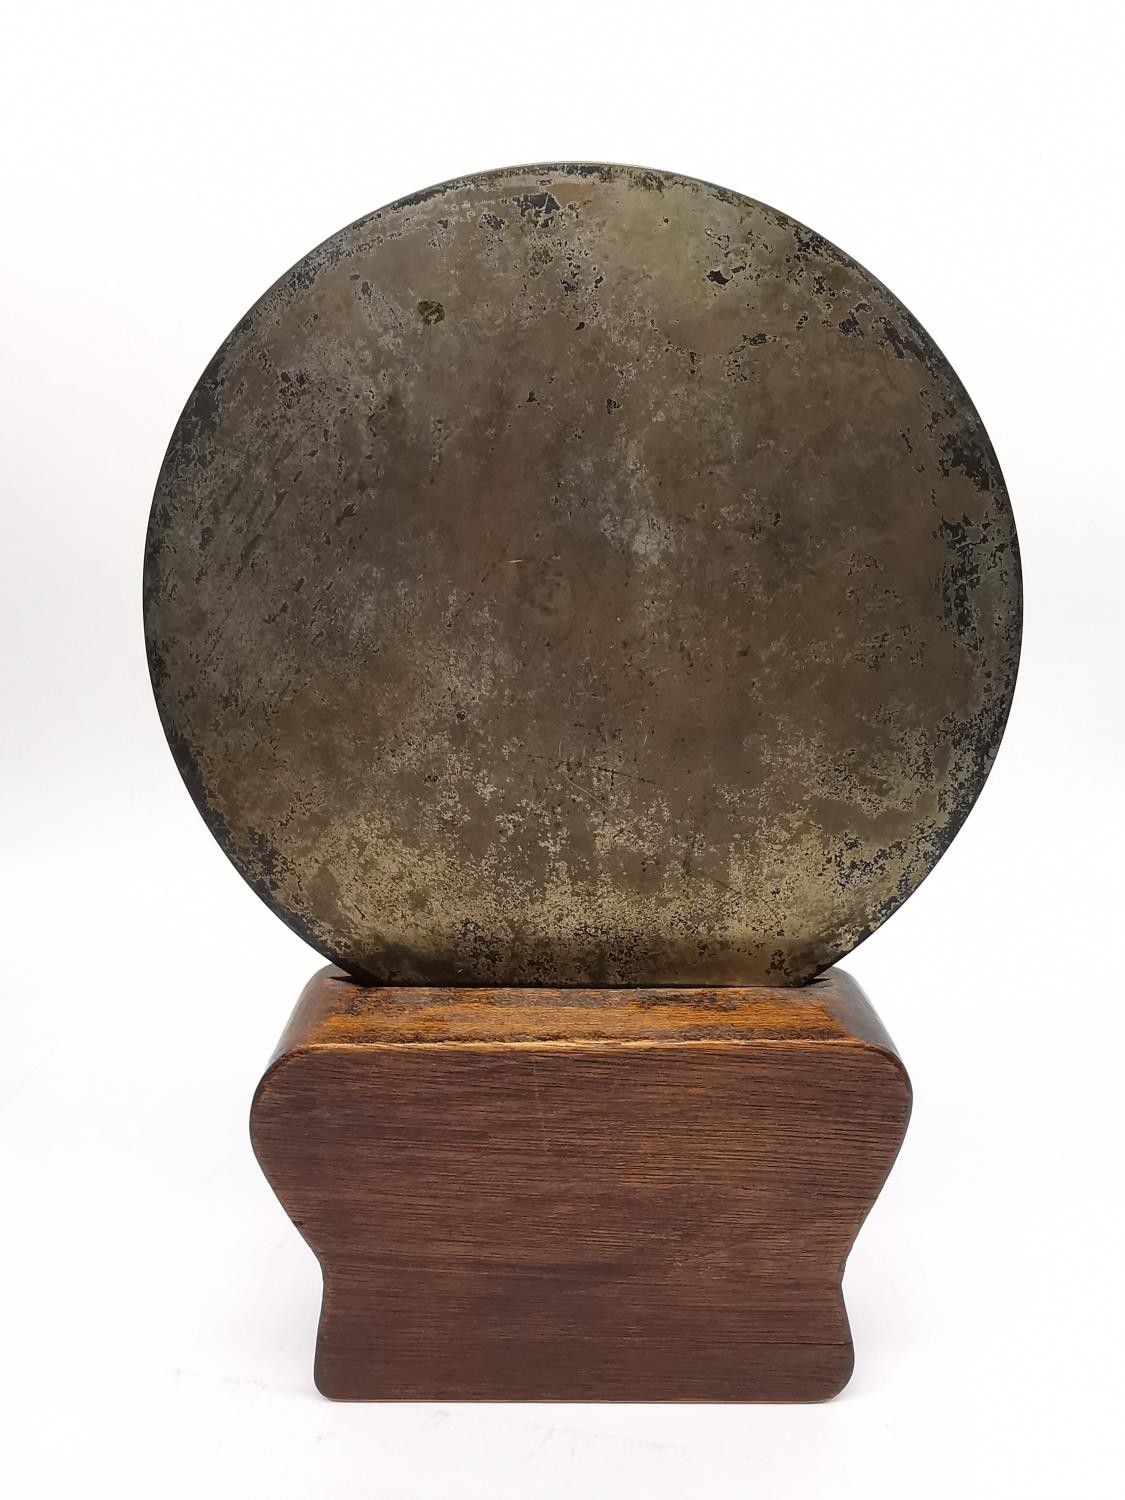 An early 20th century Japanese bronze Kagami mirror on wooden stand, decorated with a pine tree - Image 2 of 9